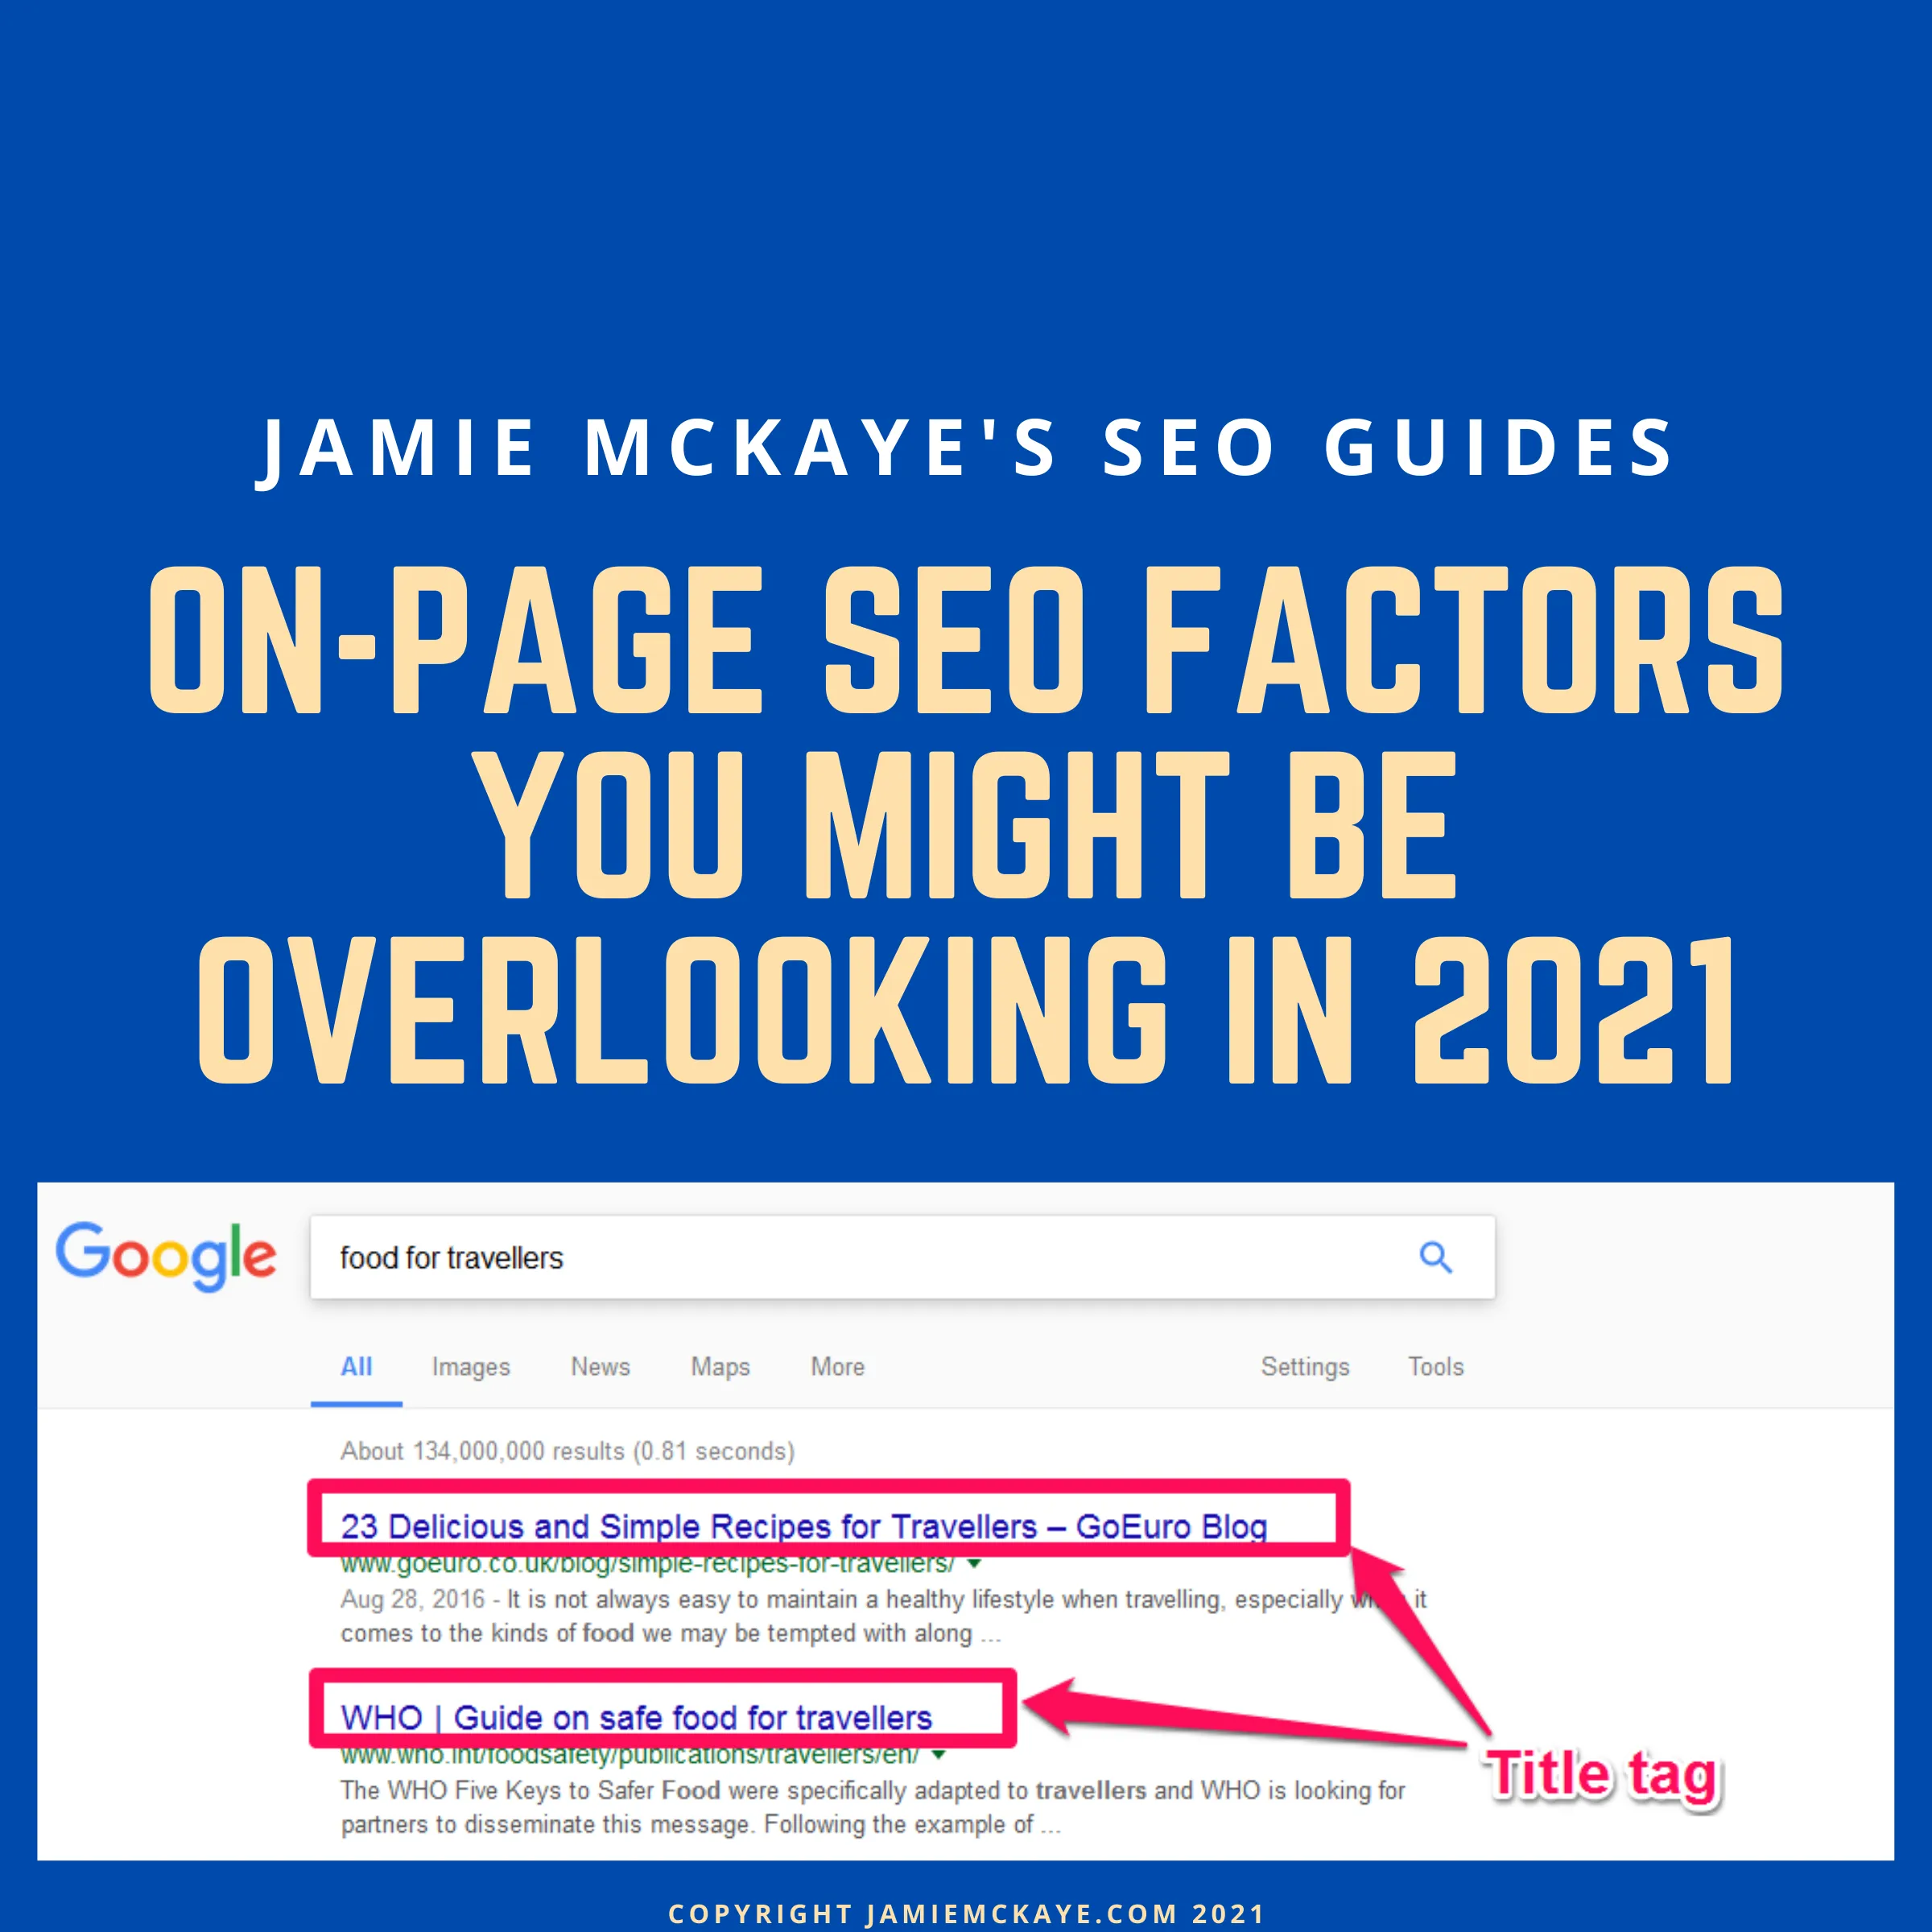 On page SEO Factors you might be overlooking in 2021